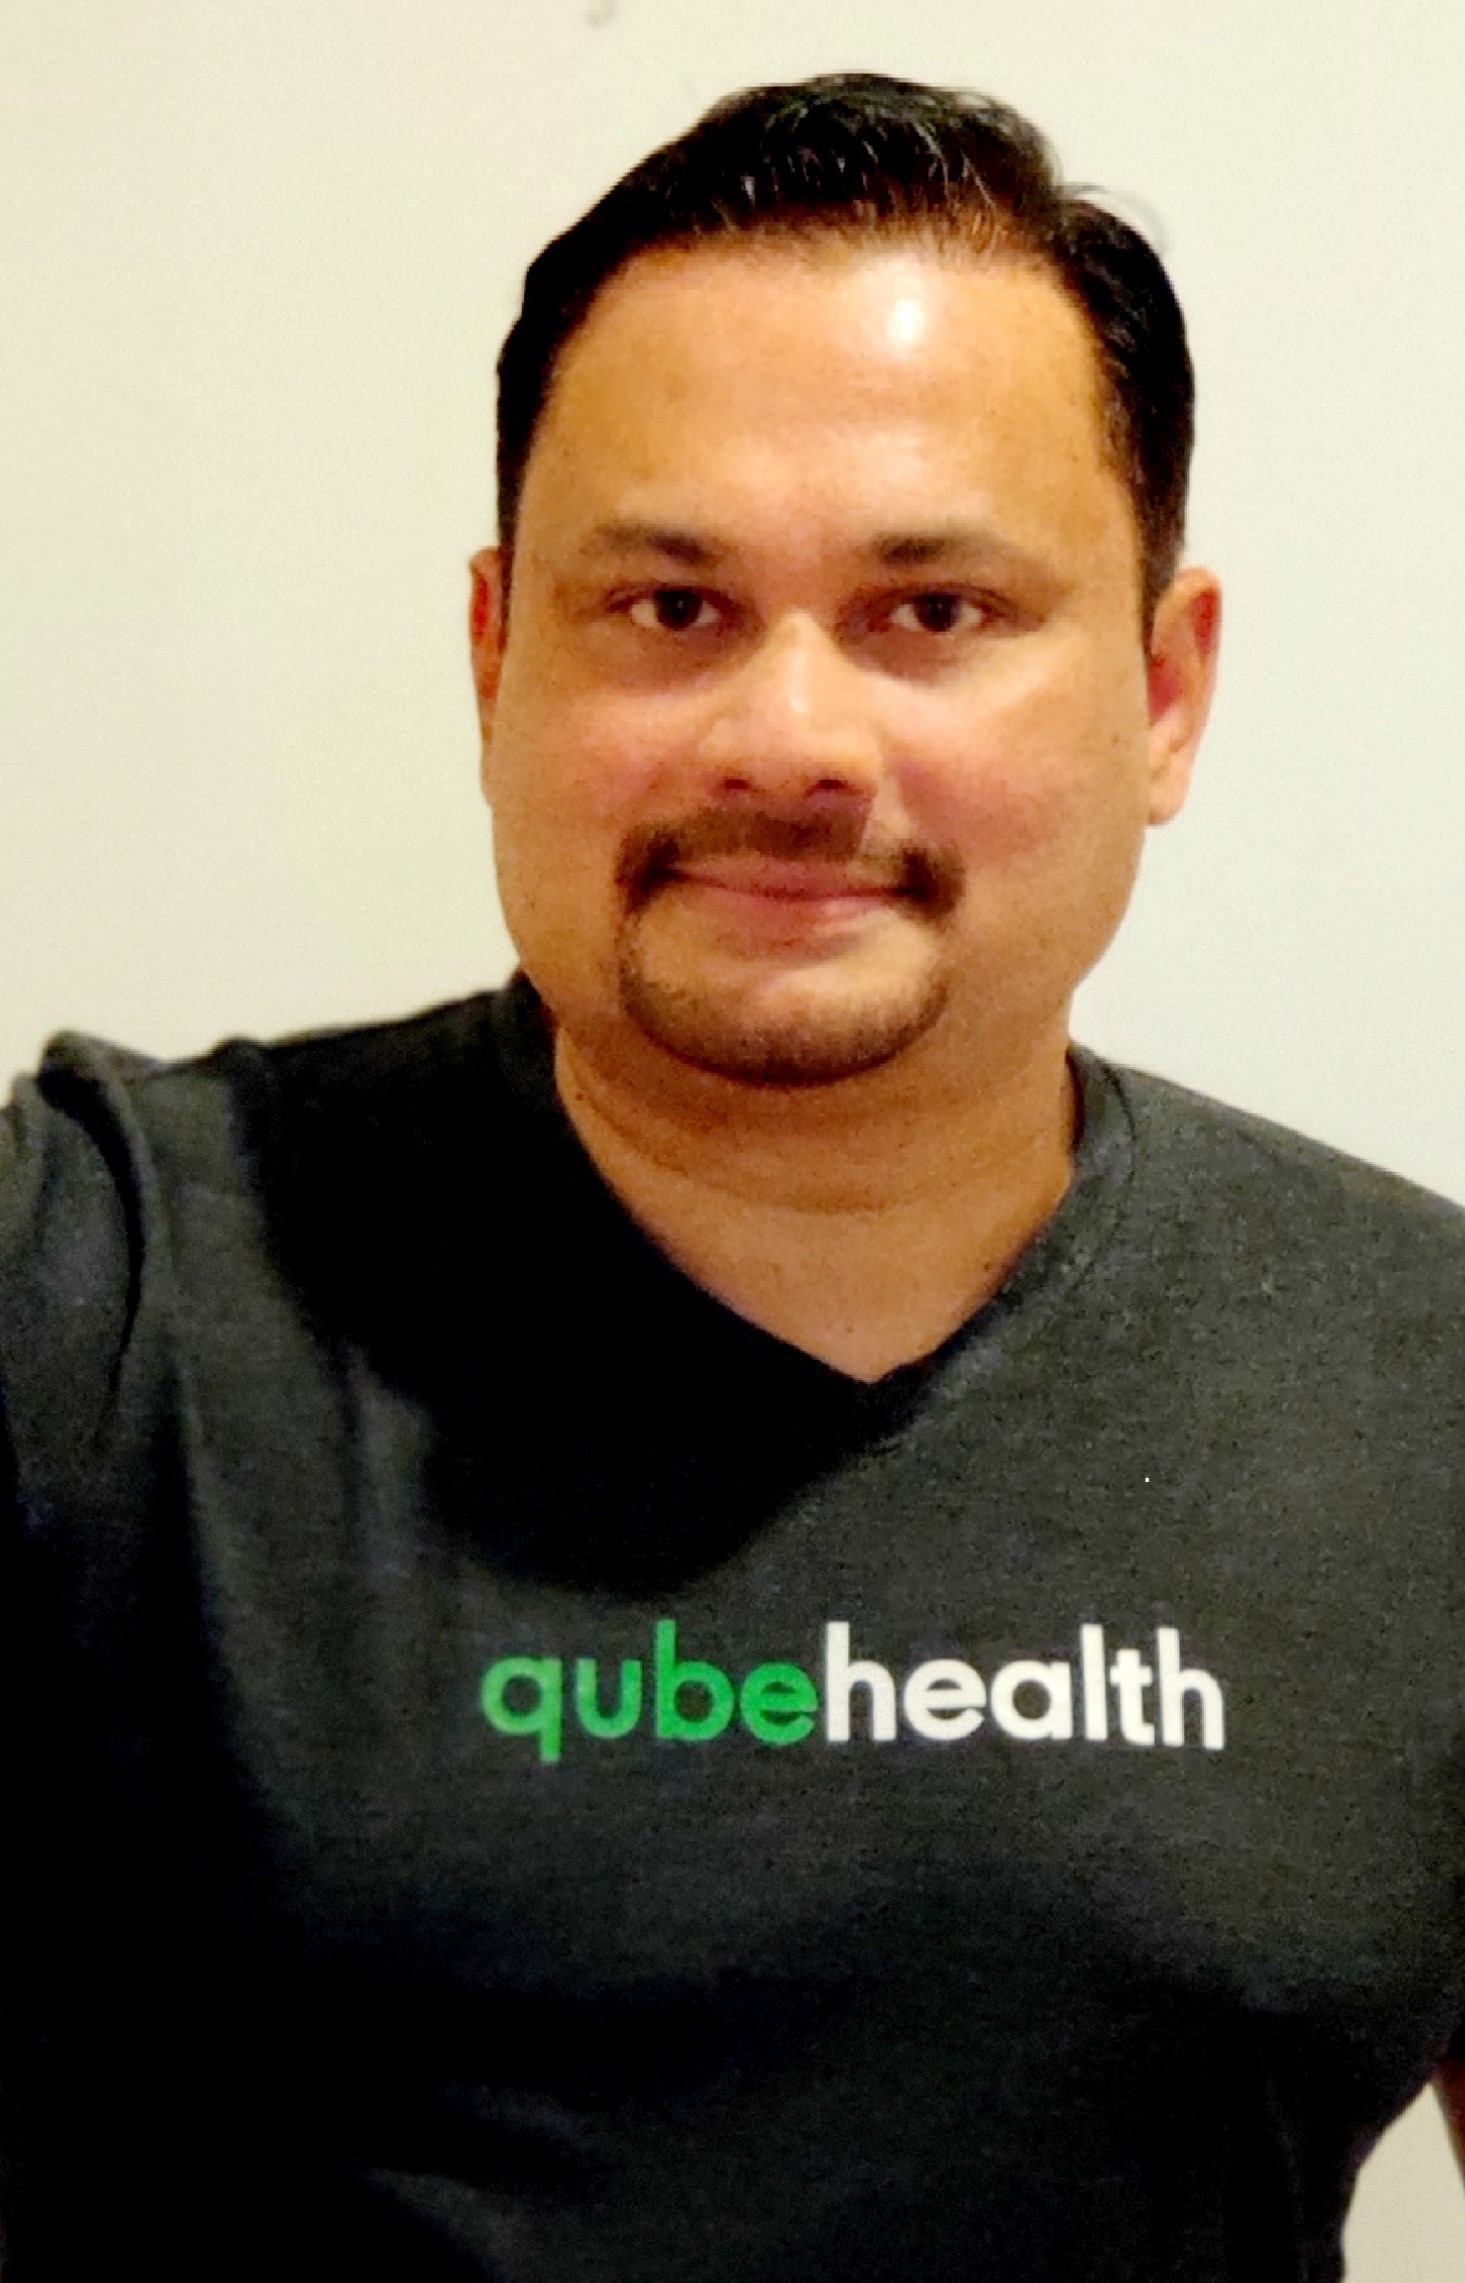 QubeHealth partners with OboPay to launch 0% Pre-Approved Medical Credit